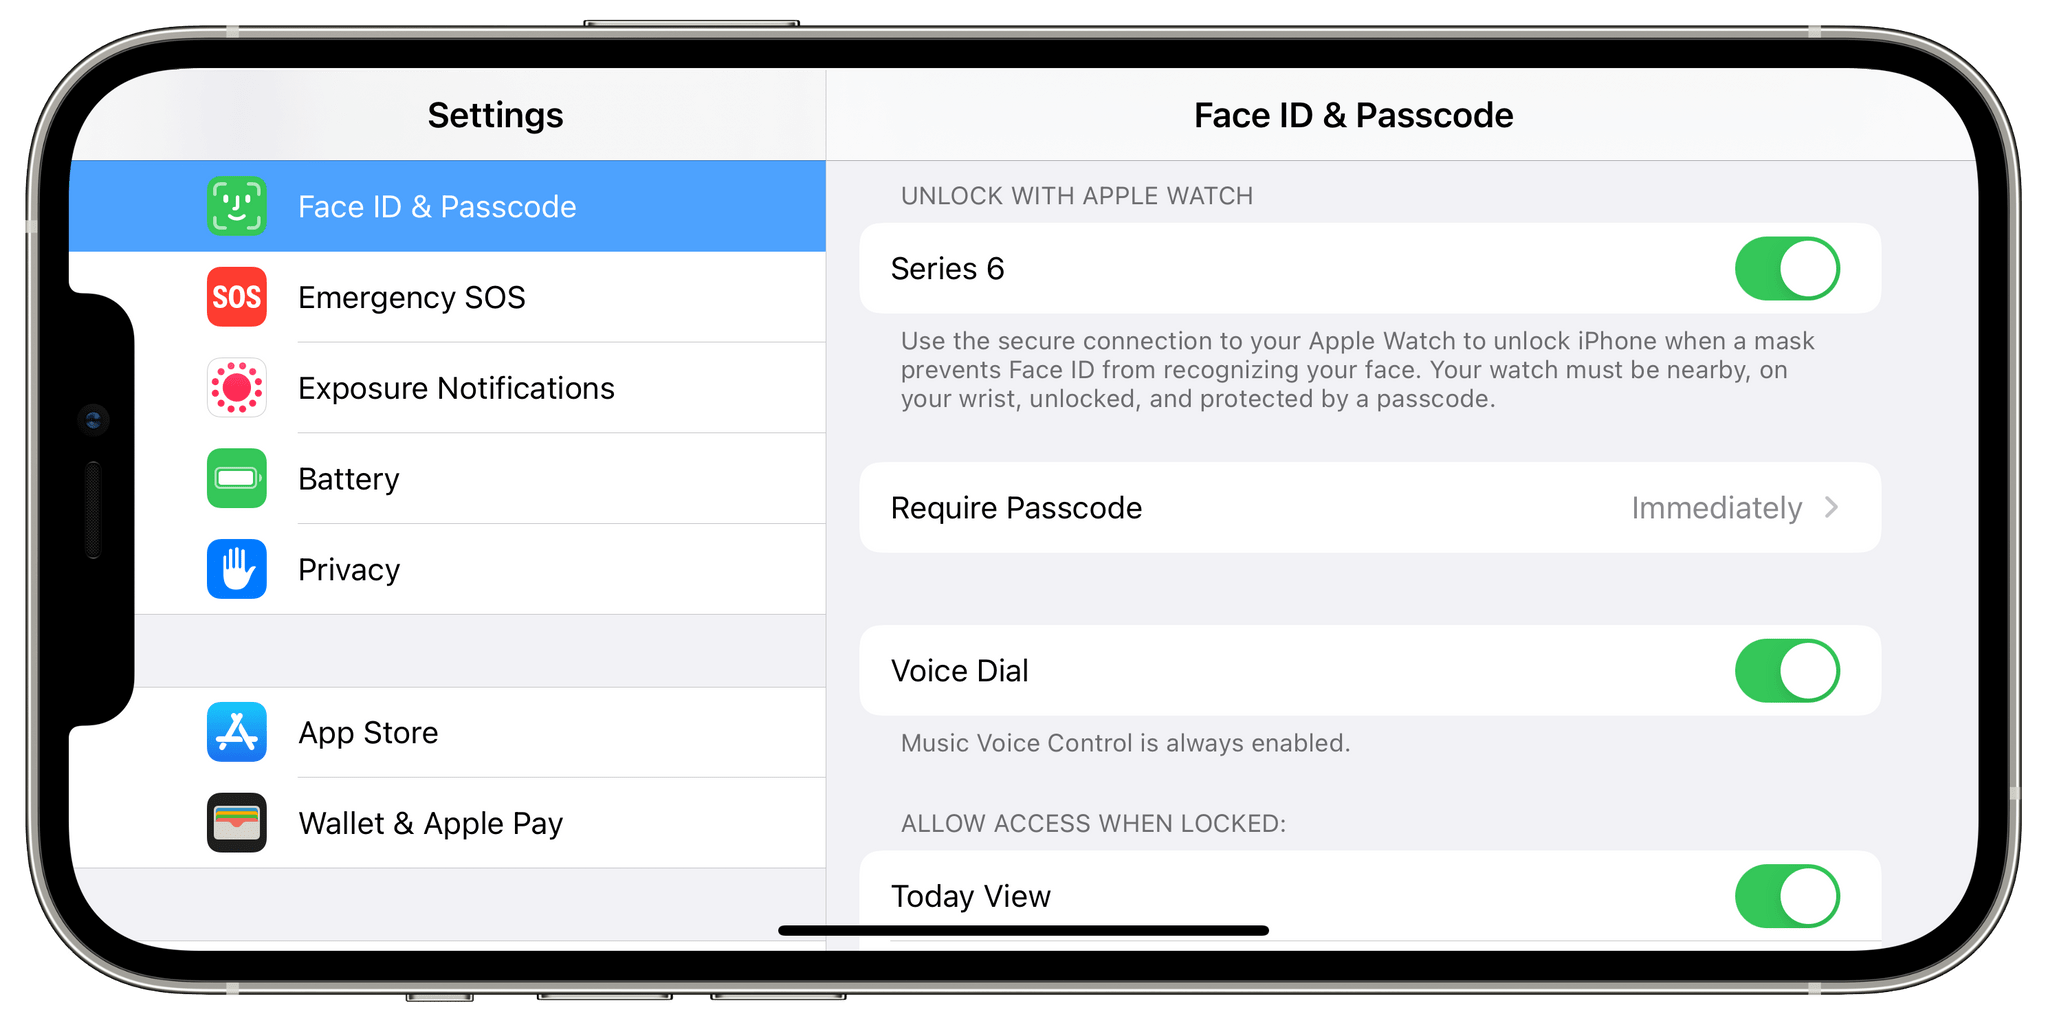 The new 'Unlock with Apple Watch' setting in iOS 14.5.